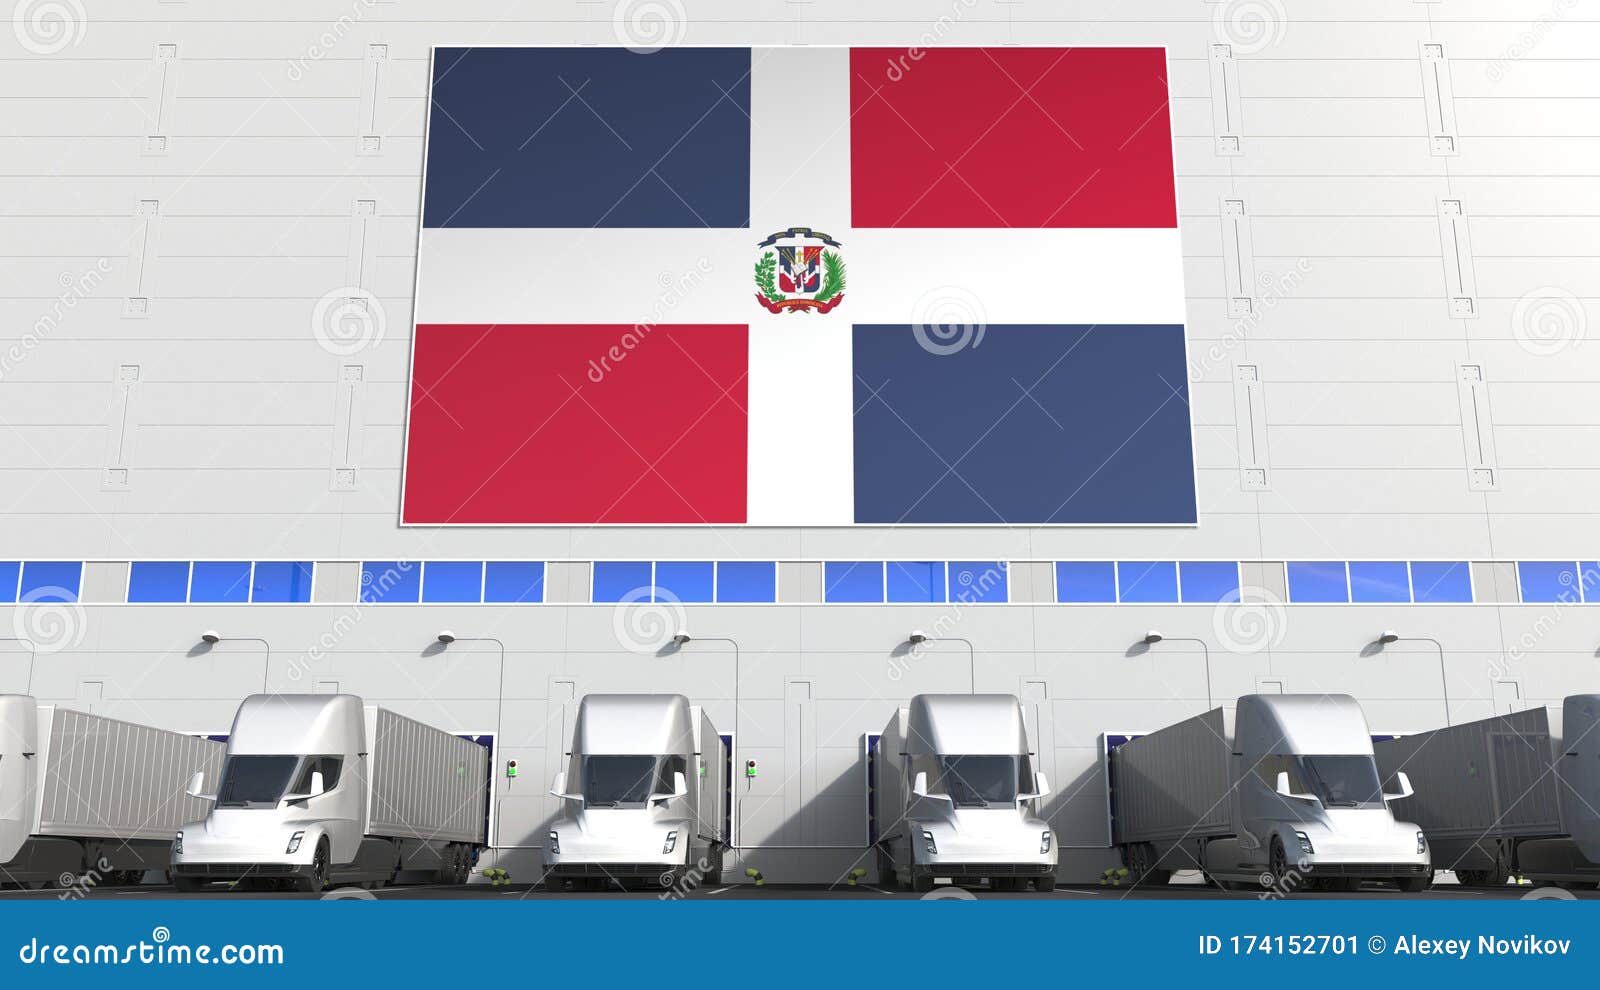 Trucks At Warehouse Loading Bay With Flag Of The Dominican Republic